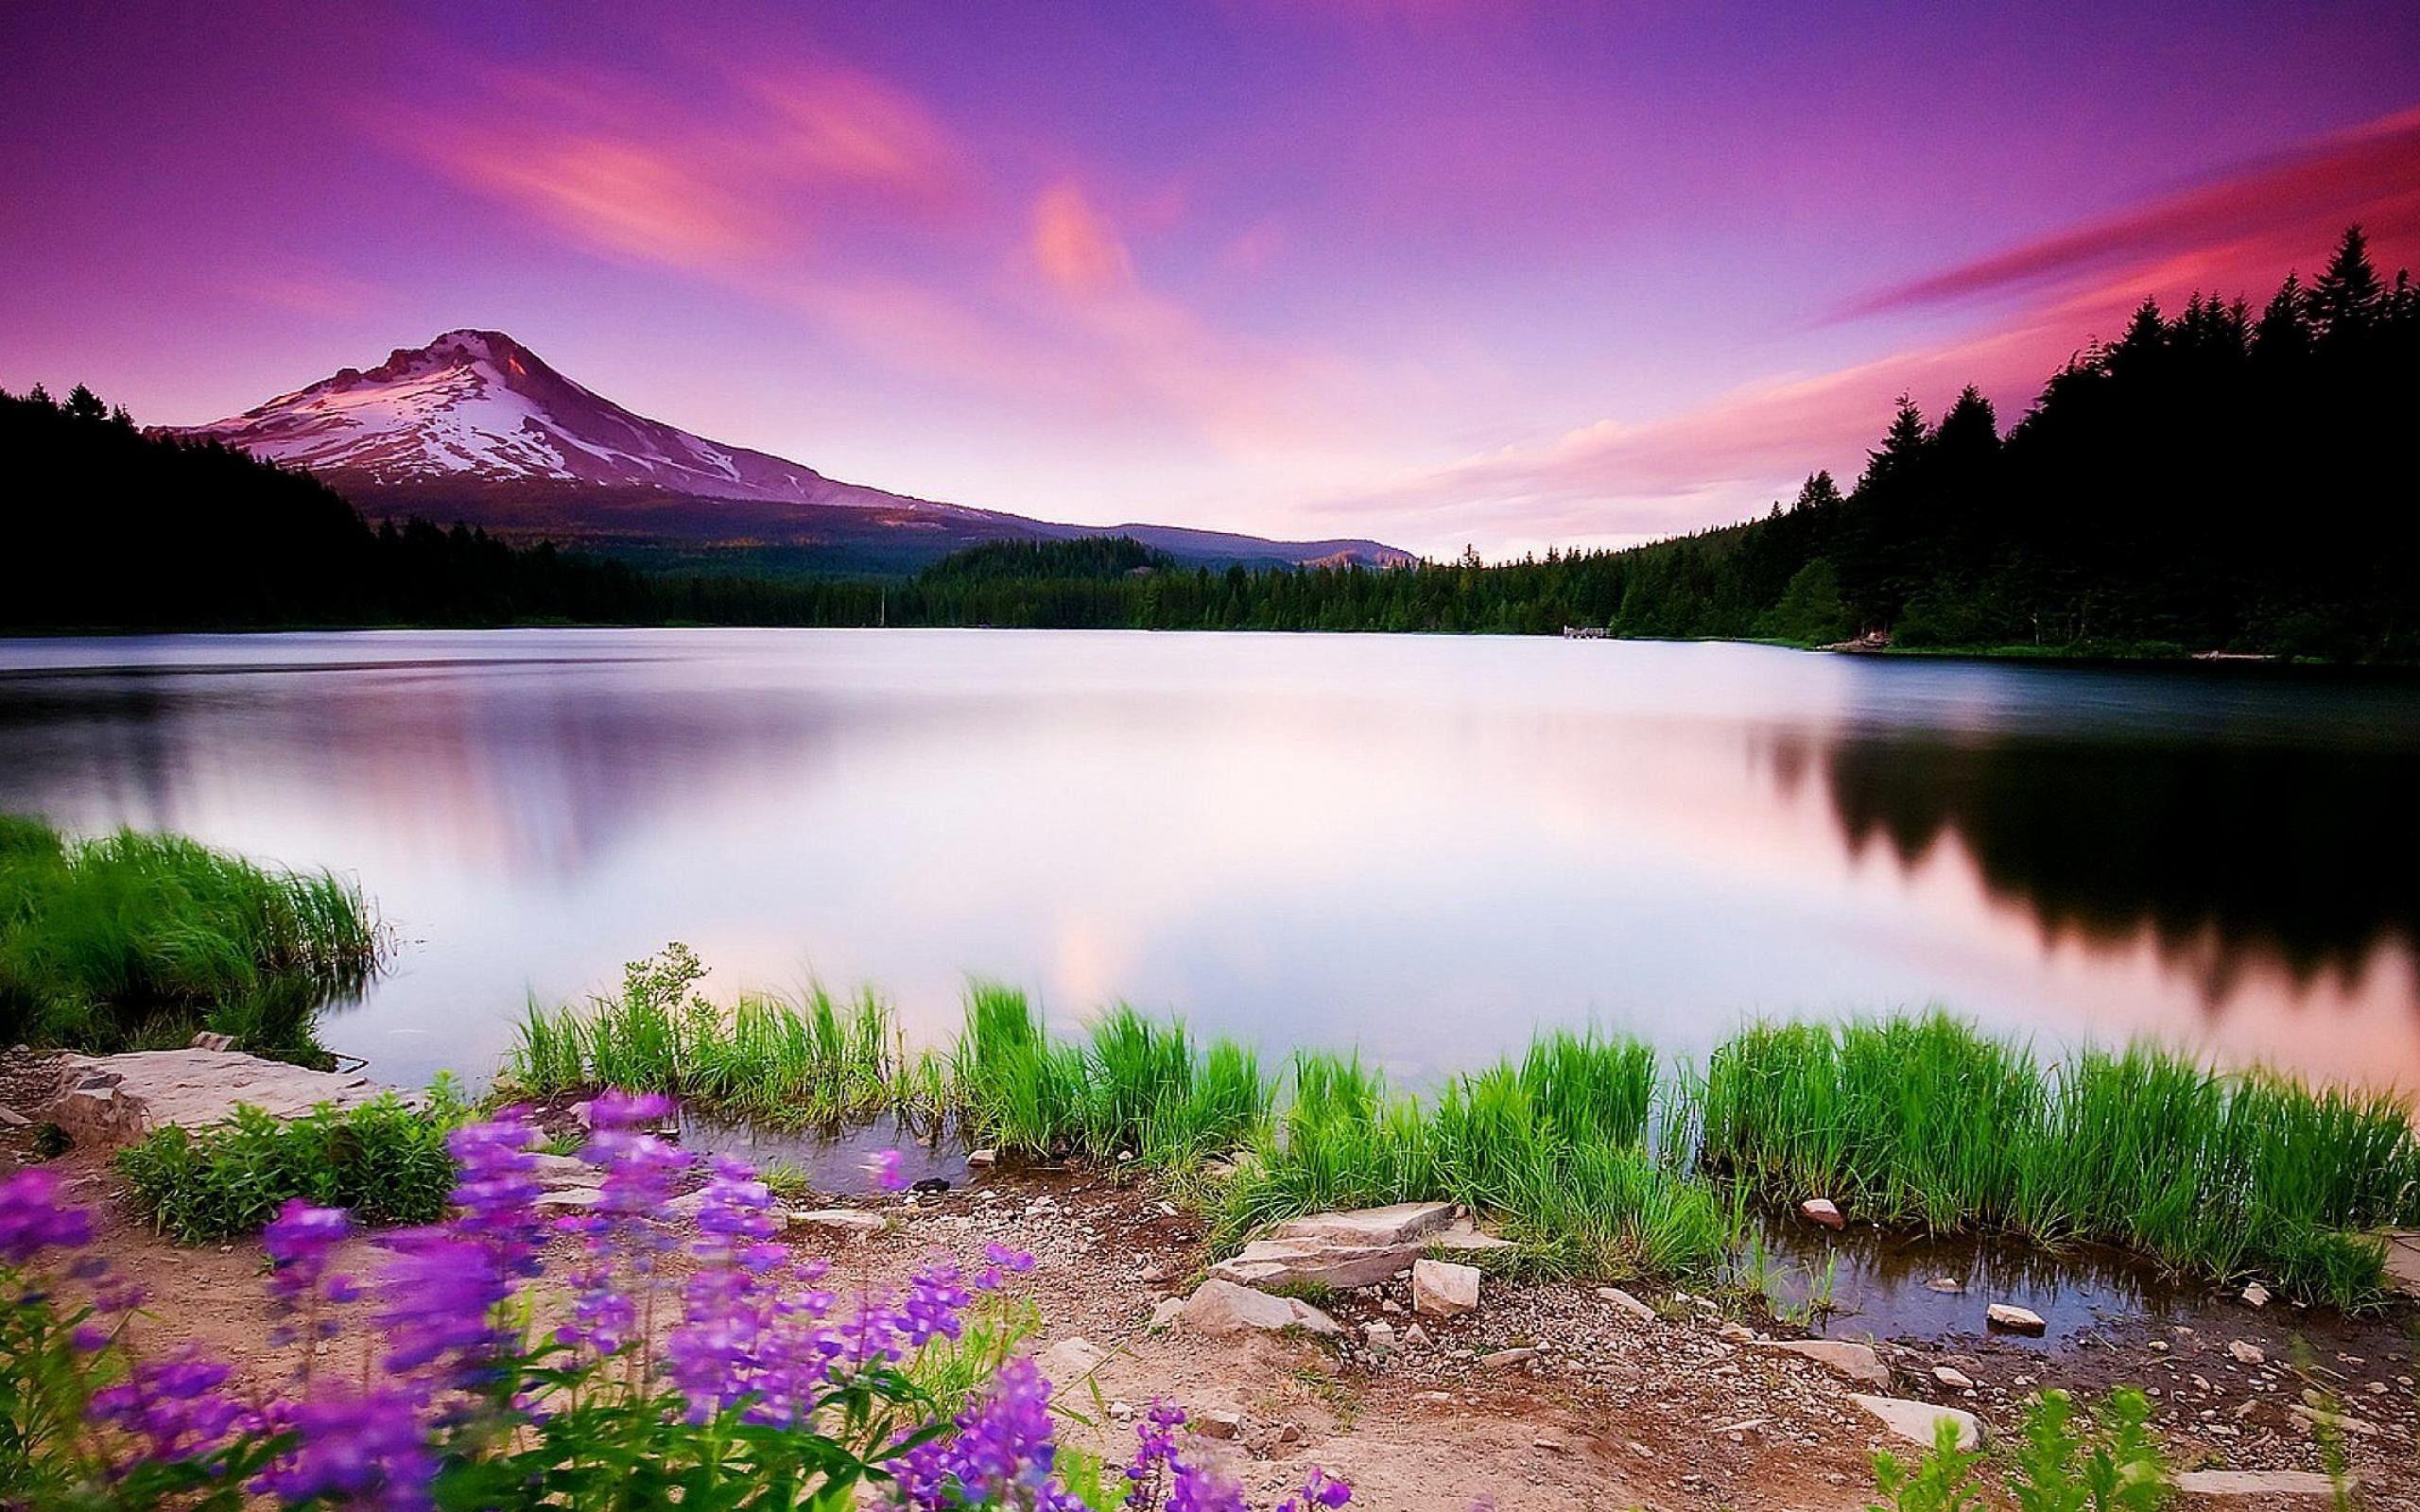 Landscape With Mountain, Lake And Flowers Wallpapers - Wallpaper Cave